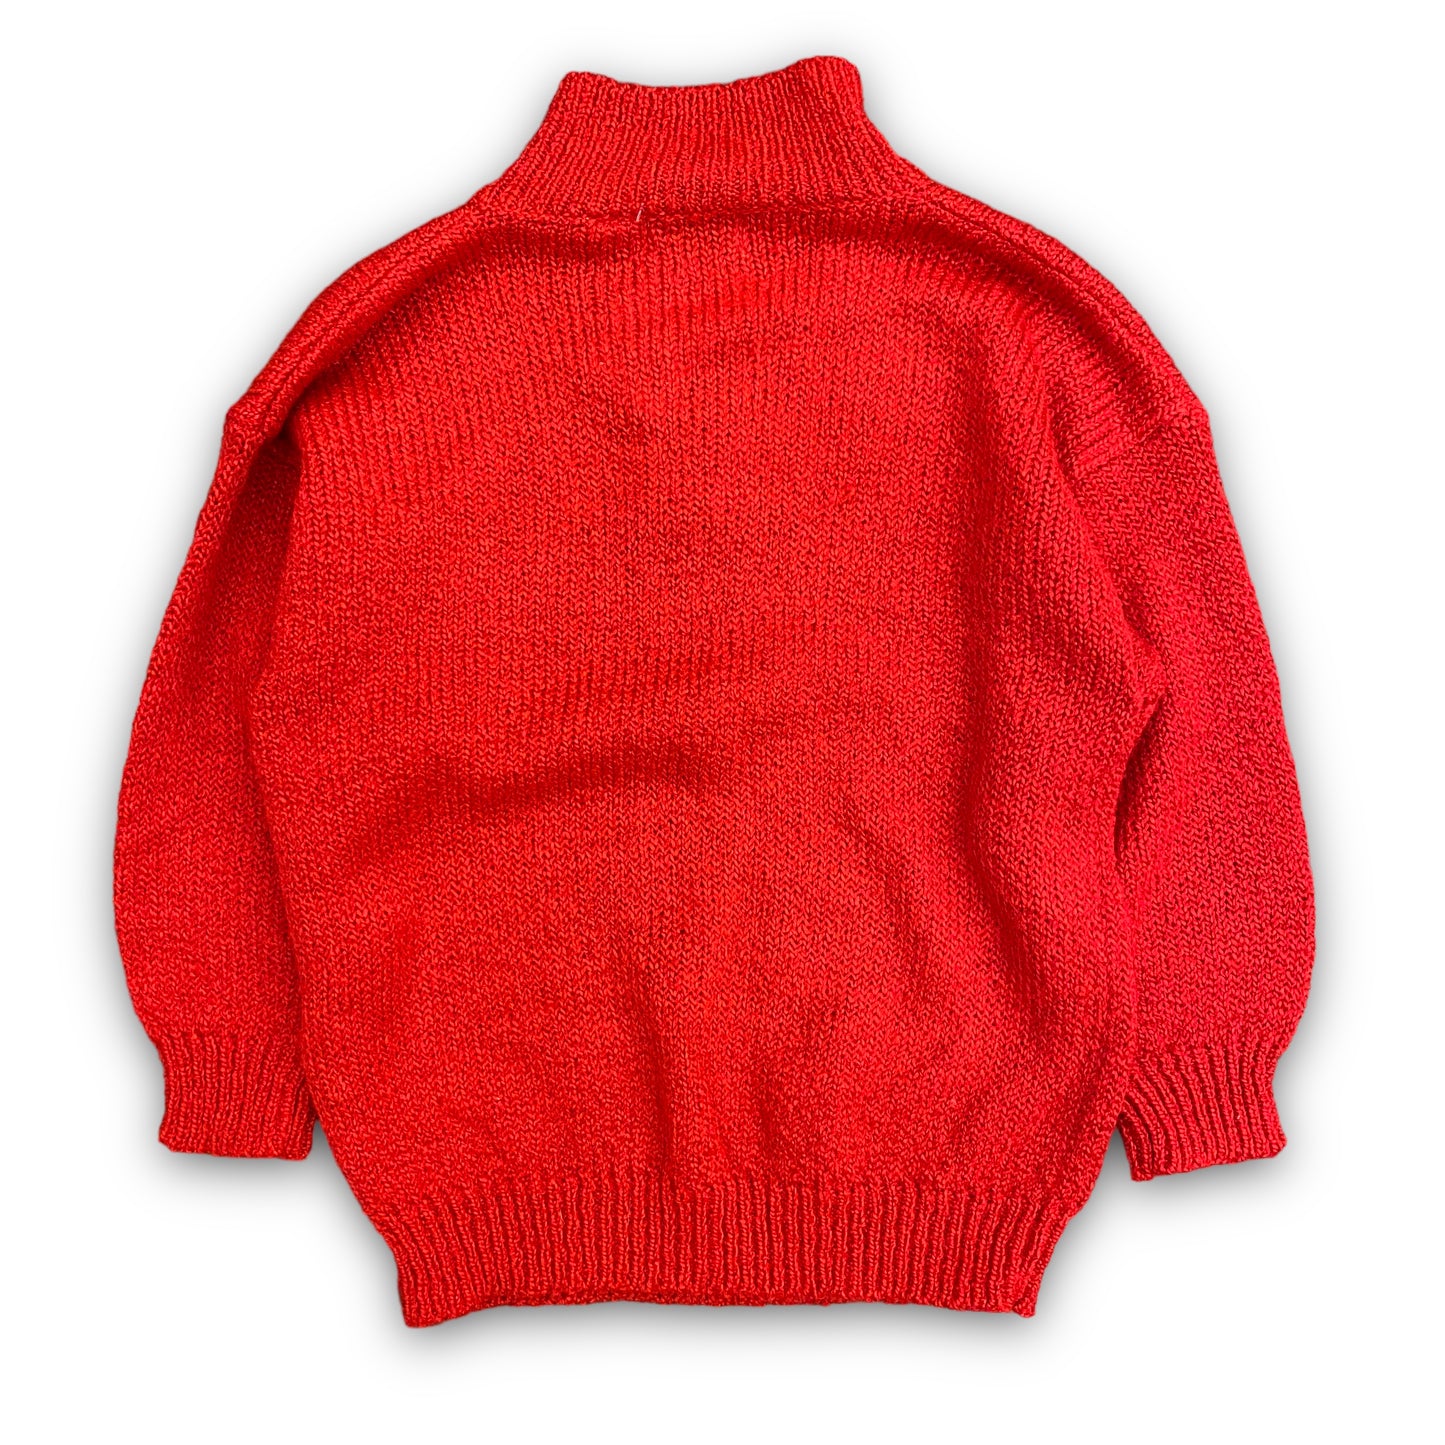 Vintage Bristol Court Red Acrylic Knit Sweater - Size Large